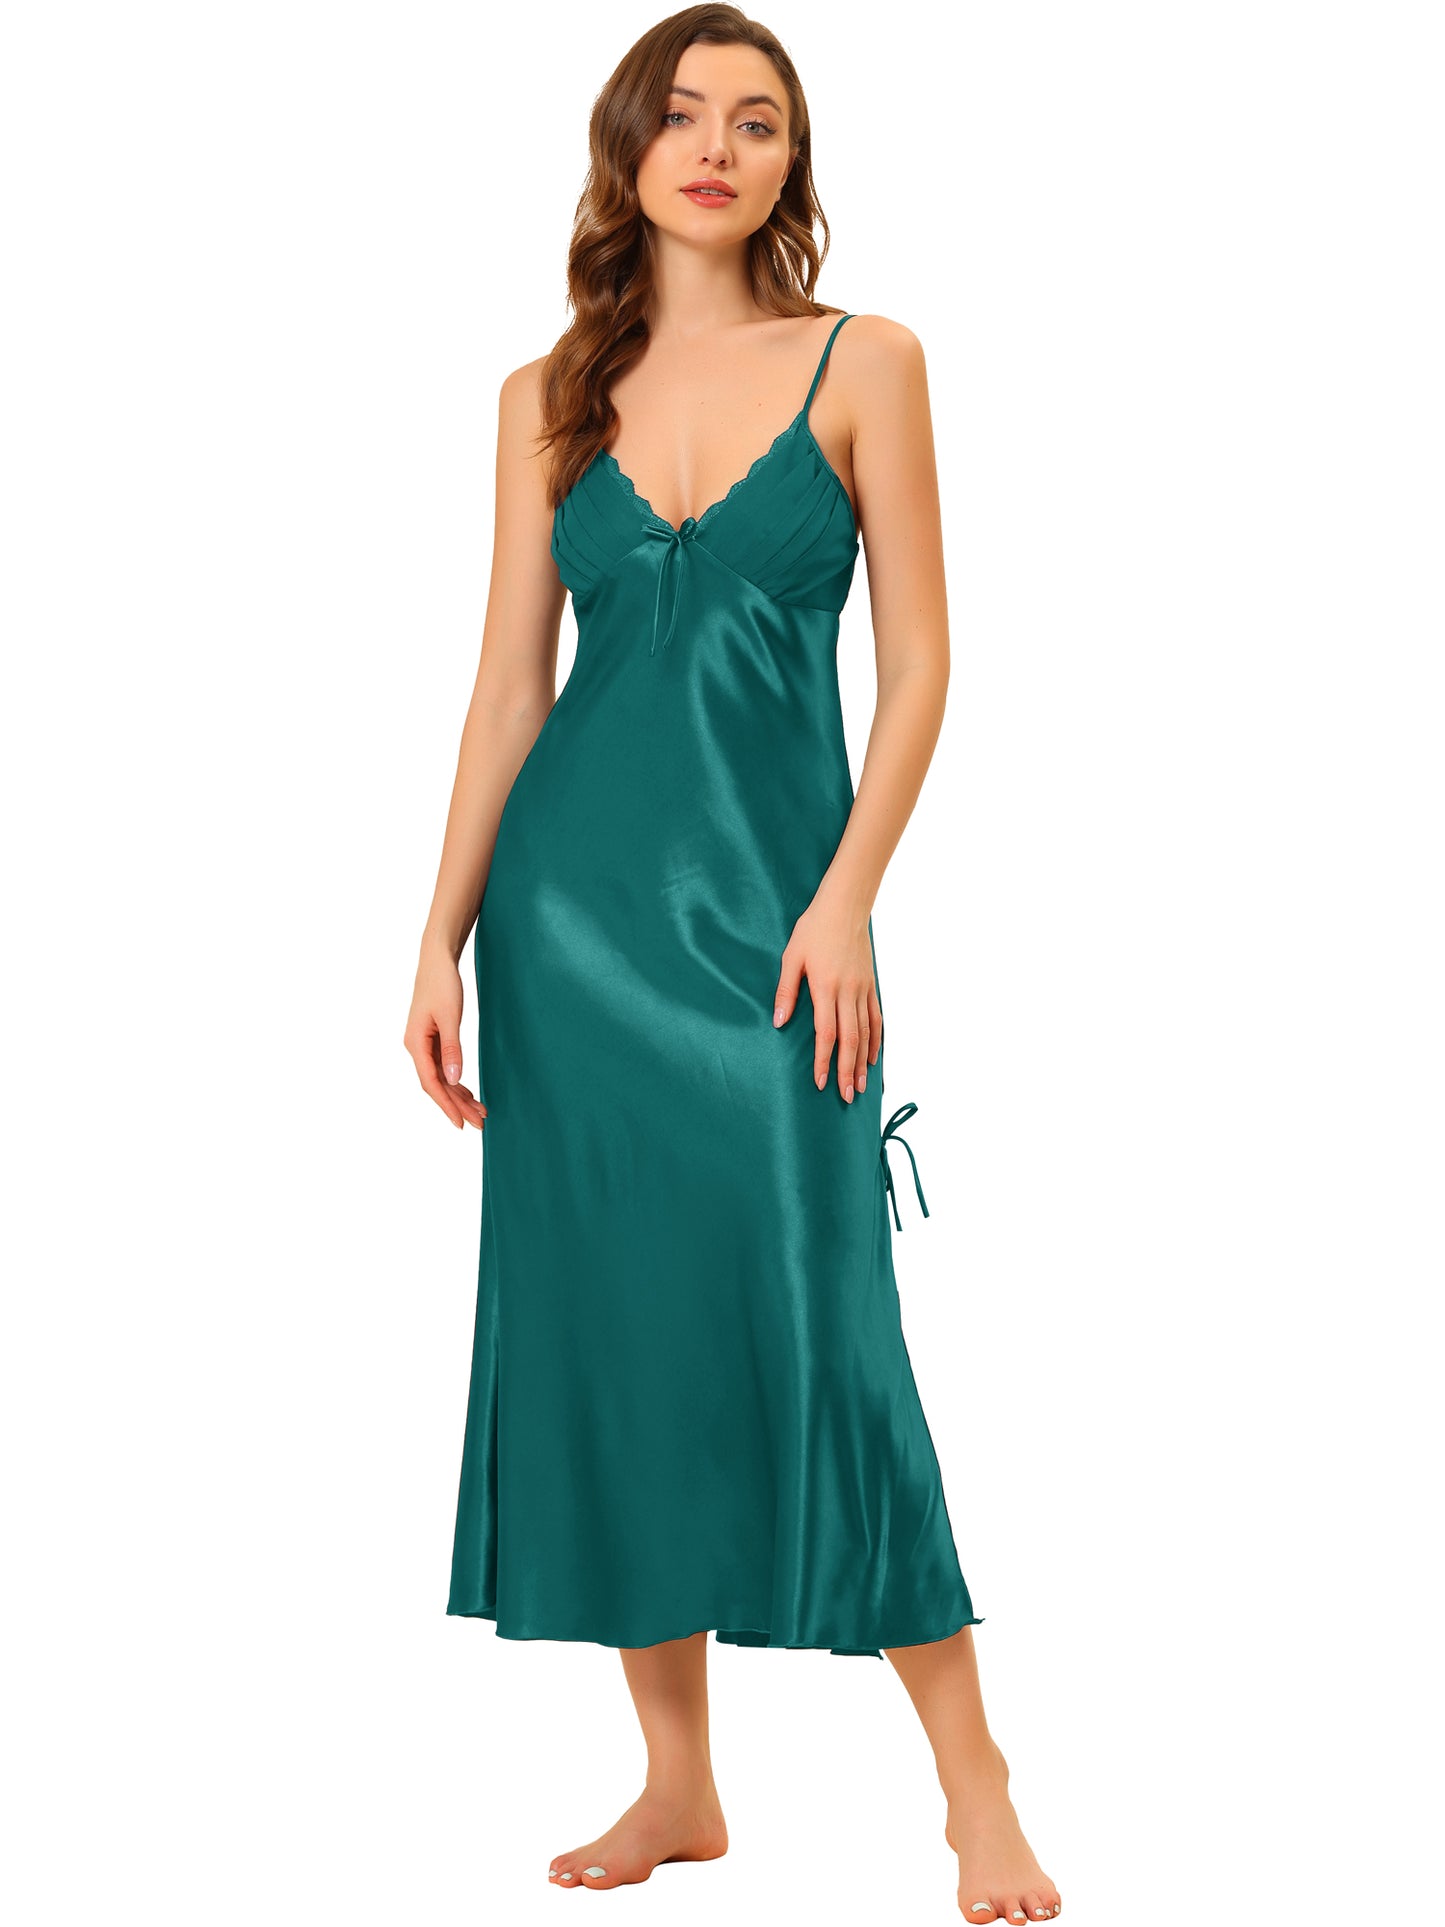 cheibear Satin Slip Dress Chemise Silky Lounge Camisole Maxi Nightgowns Peacock Green